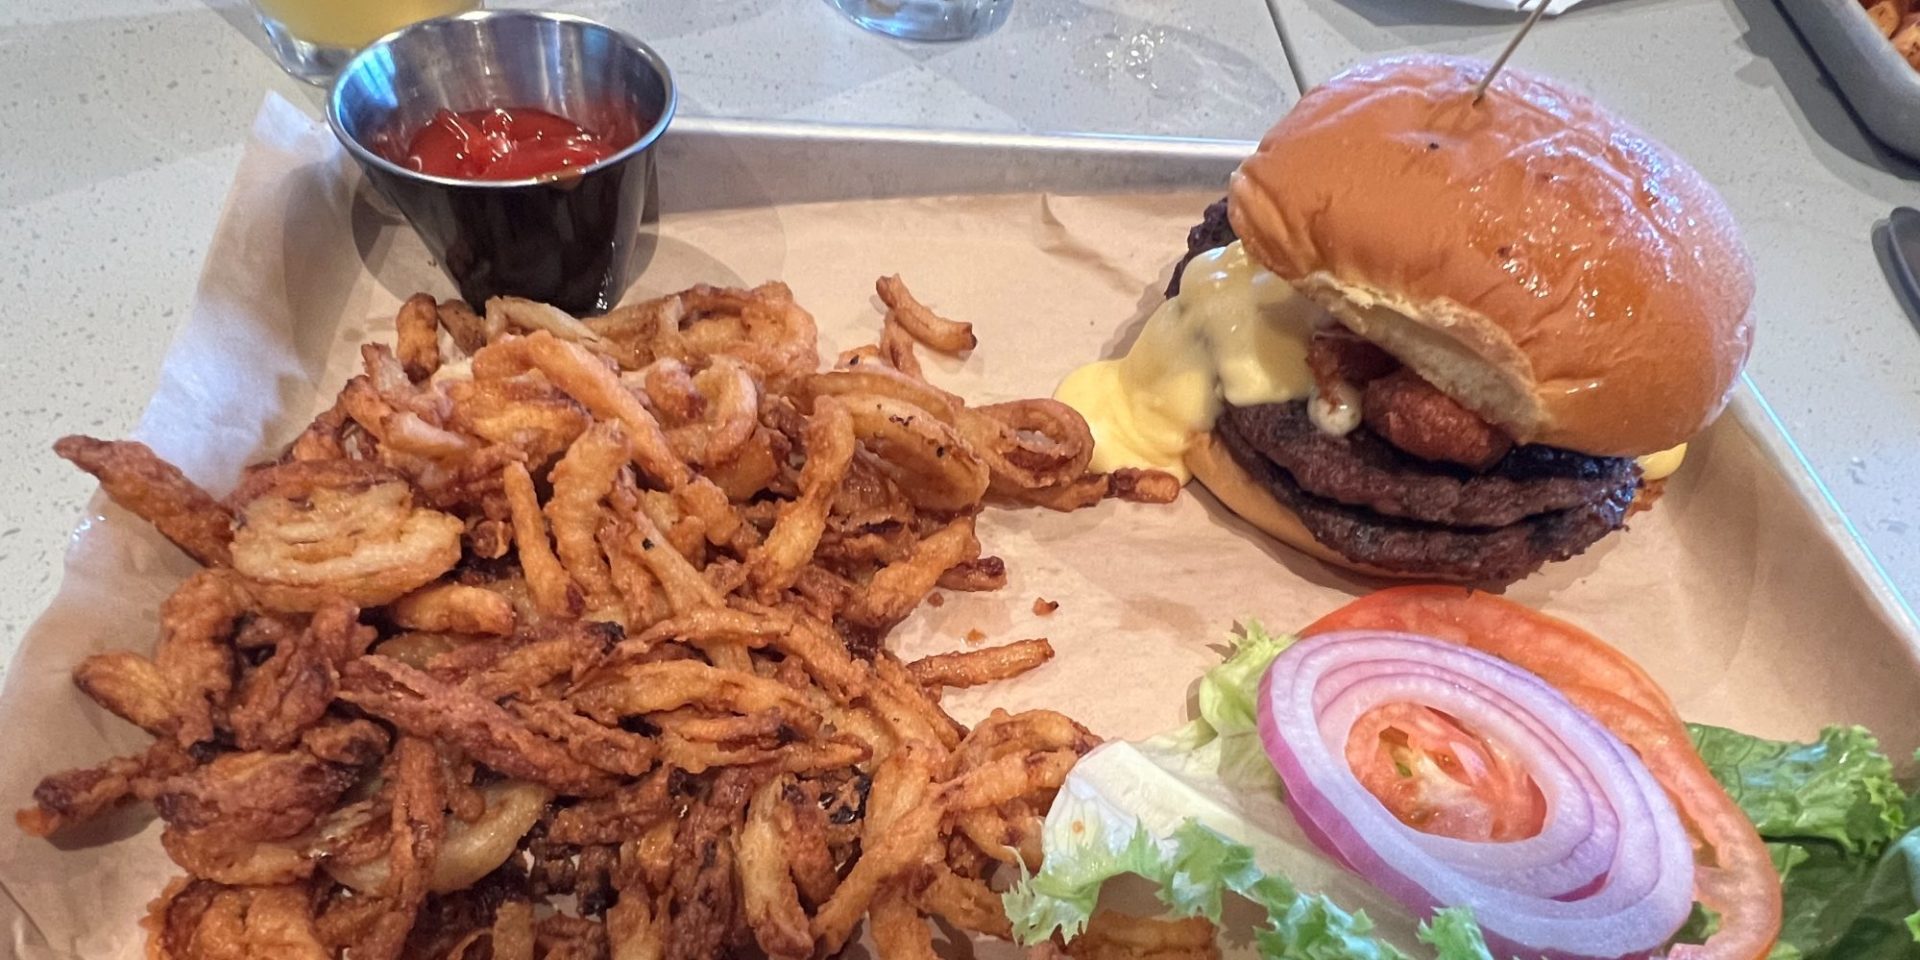 A burger with toppings on the side and a giant portion of crispy onions.